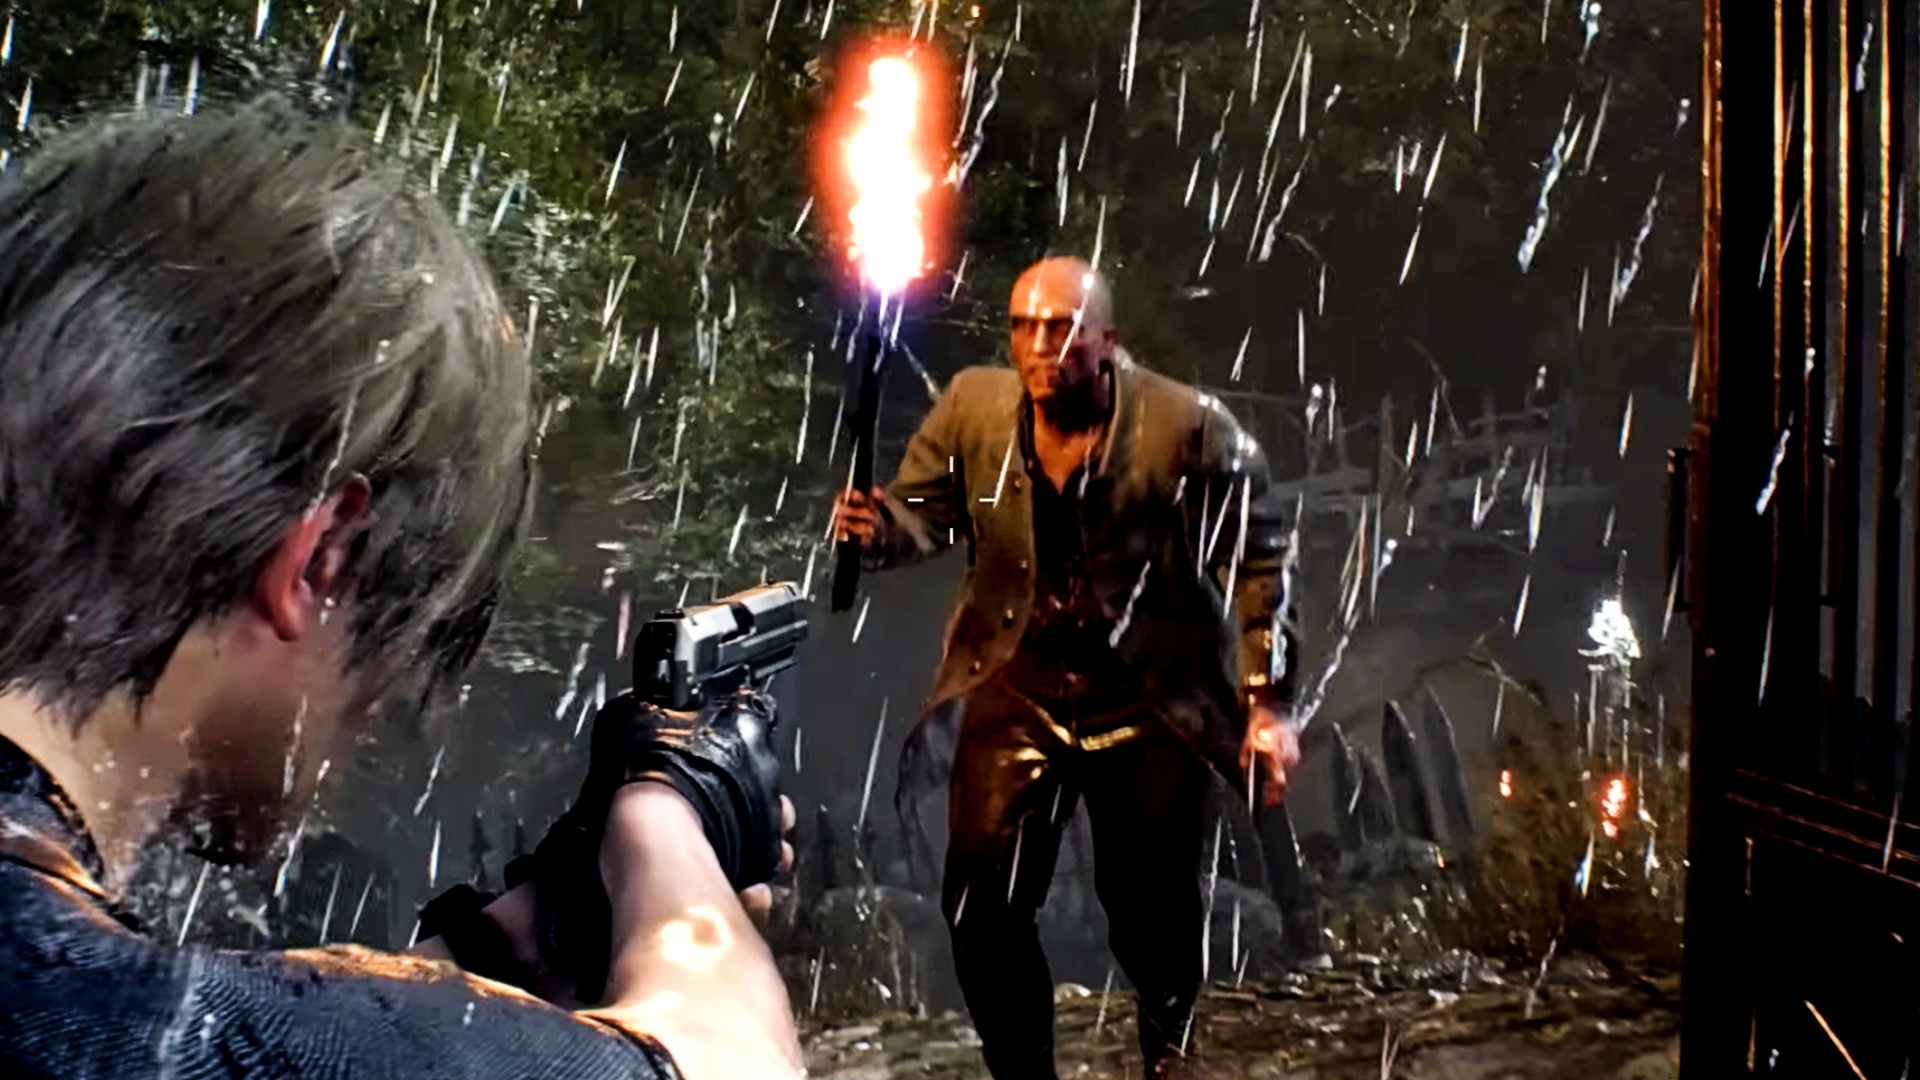 Resident Evil 4 Remake PC Requirements Revealed; New Screens and